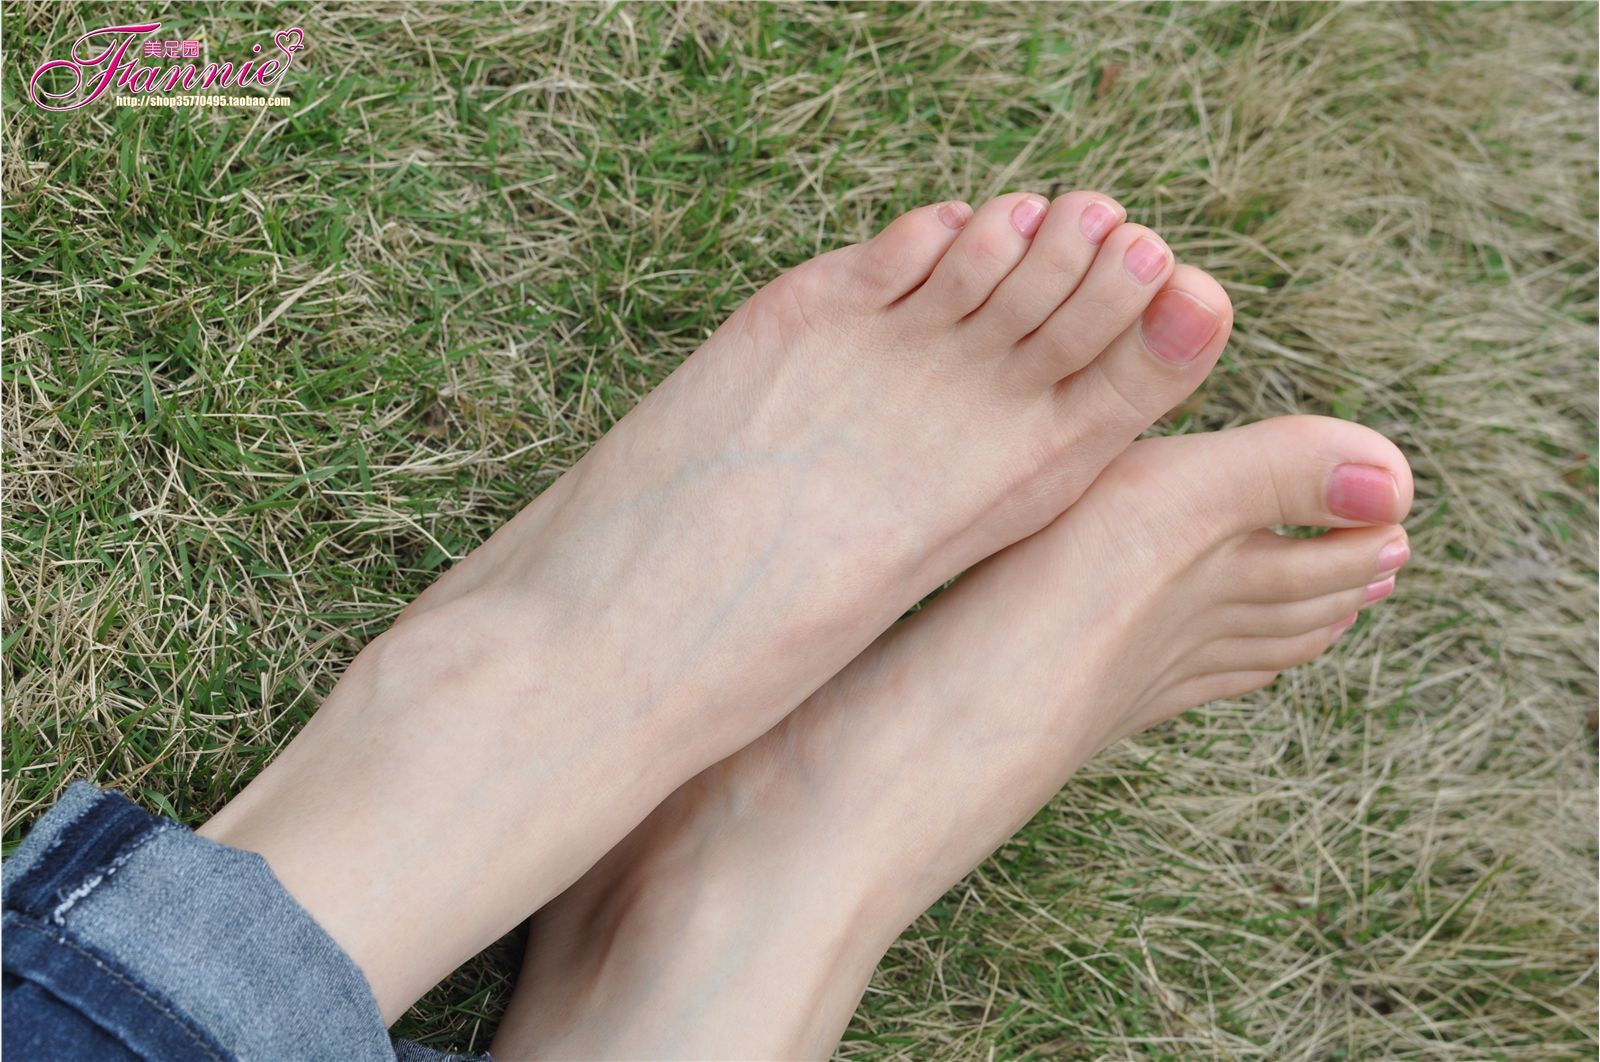 Fanny's feet: willow and spring